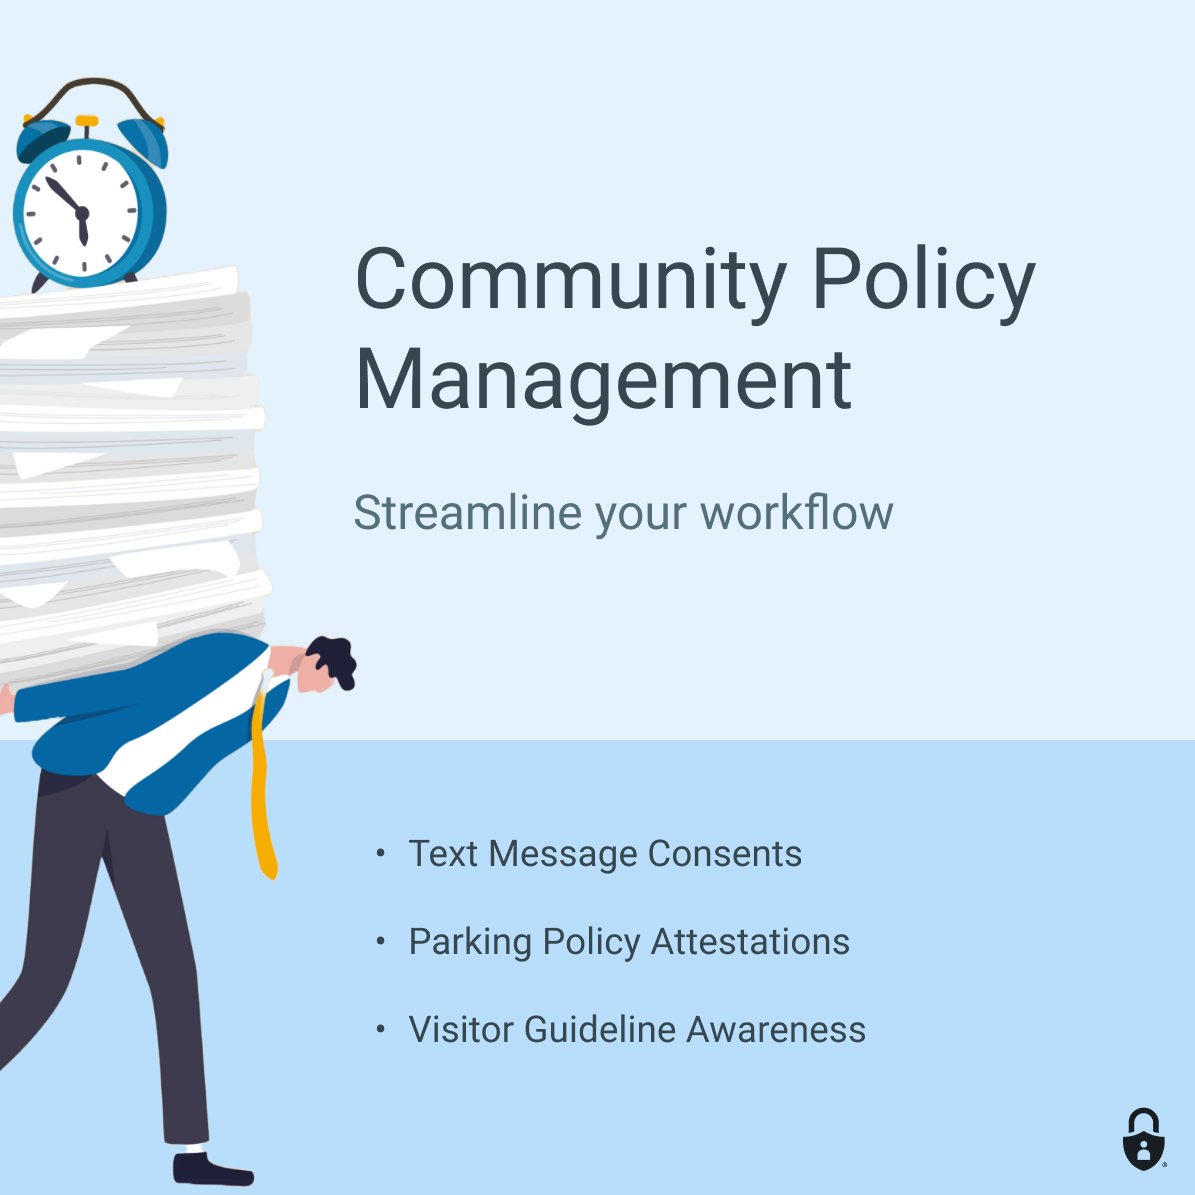 Are you still tracking policy and consent acknowledgments on paper? Streamline your workflow with Accushield's Community Policy Management feature! 

Reach out to sales@accushield.com to learn more.

#SimpleStartsHere #StreamlineYourWorkFlow #PaperlessProcesses #Efficiency